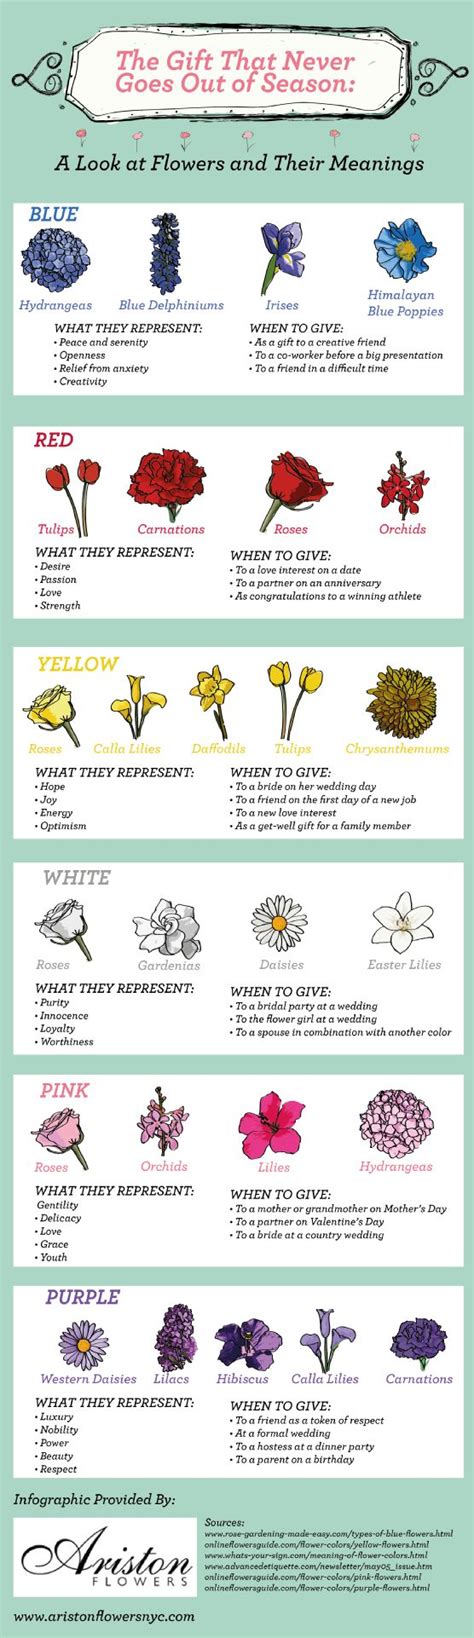 Flowers And Their Meanings Your Number One